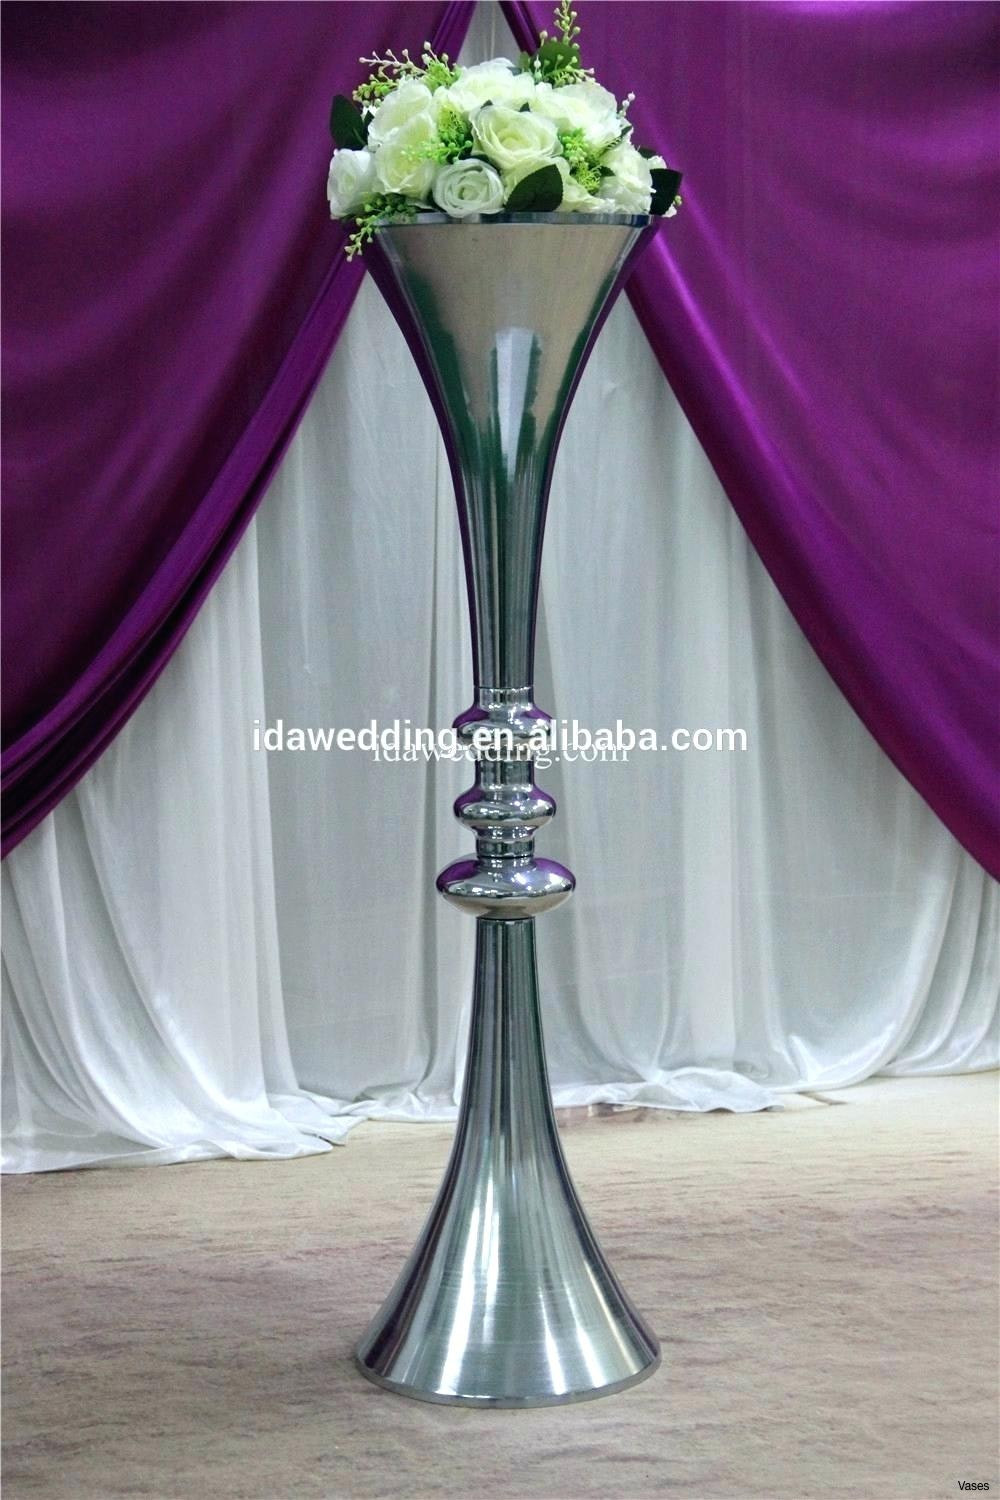 12 attractive Round Vases wholesale 2024 free download round vases wholesale of bulk vases wholesale prices cheap buy cylinder ukh for uk i 16d 3 5 in bulk vases wholesale prices cheap buy cylinder ukh for uk i 16d 3 5 at sunflower a